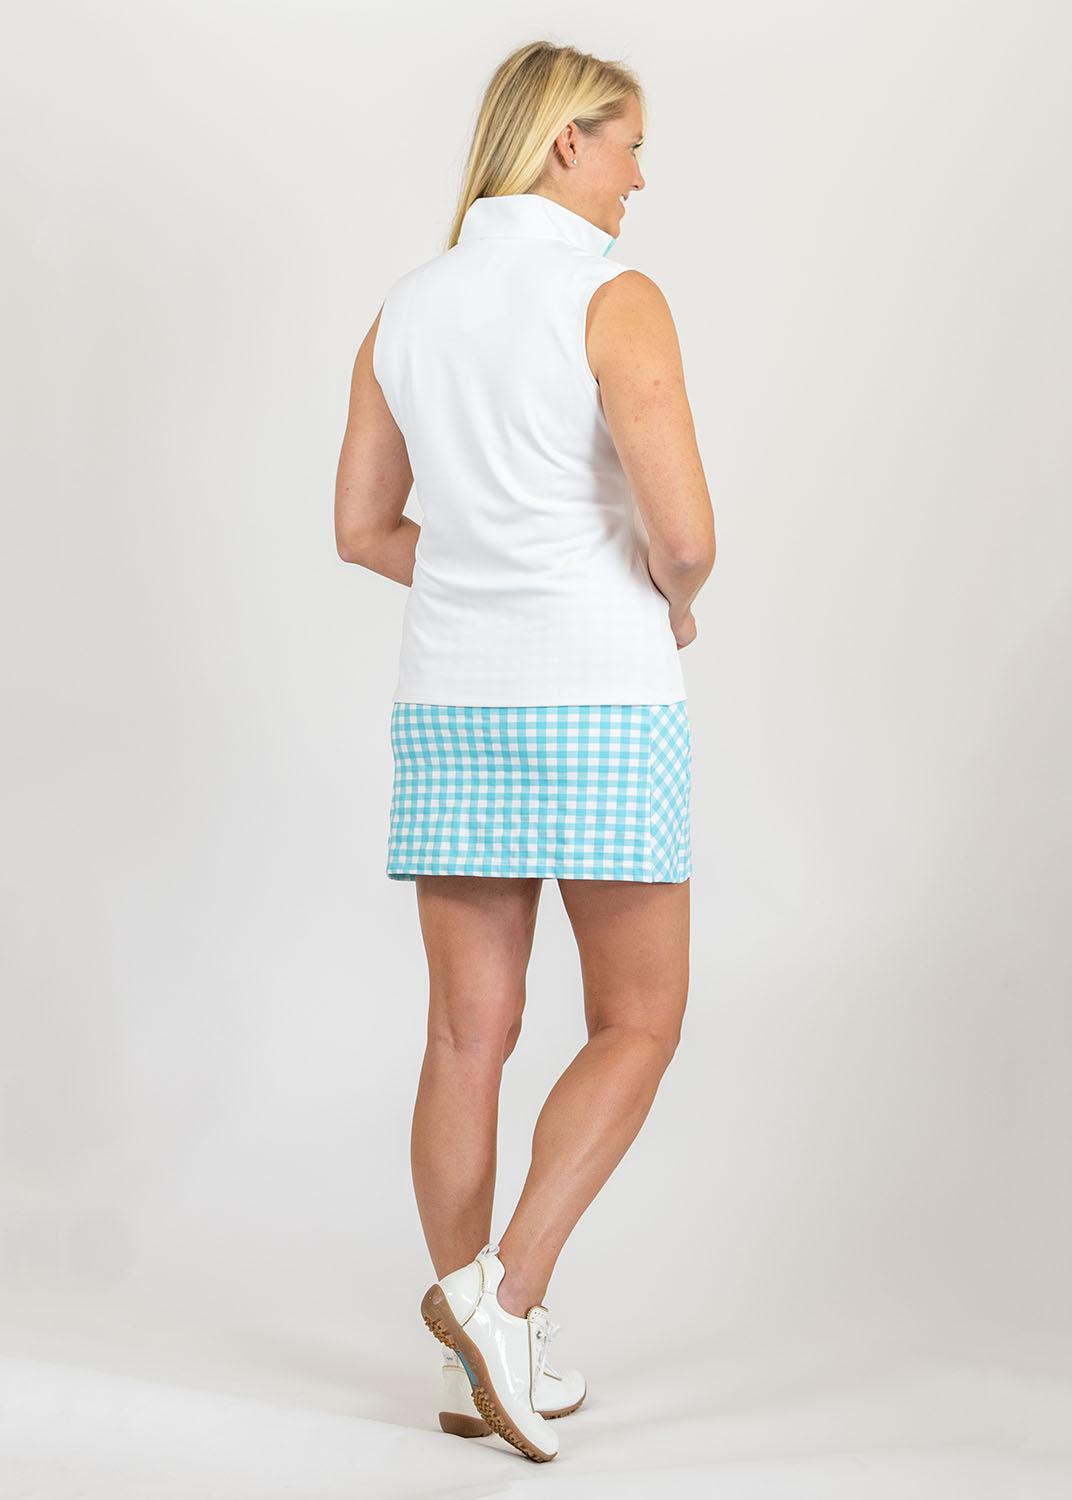 Blue & White Country Club Skort 17 inch in a Gingham Print 2